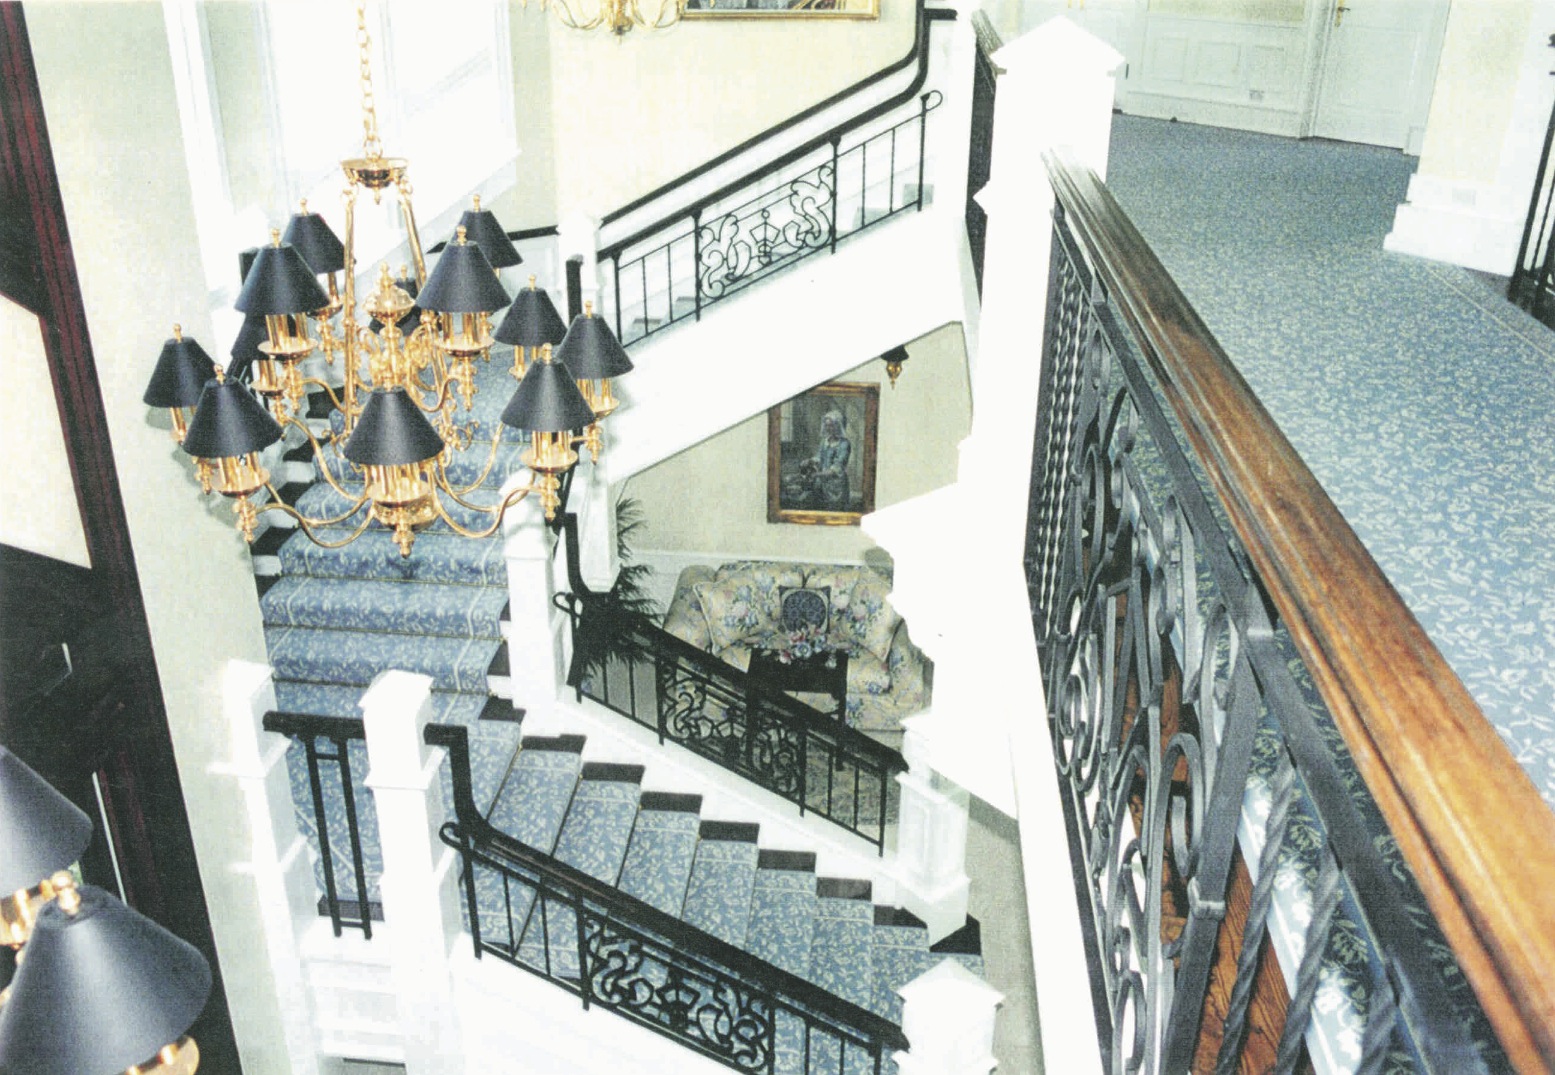 7' wide grand staircase using painted wood and iron with<br />monumental newels, three flights, two landings,  approx. 50'<br />horizontal railings/balustrade, view 2 - Sailfish Point